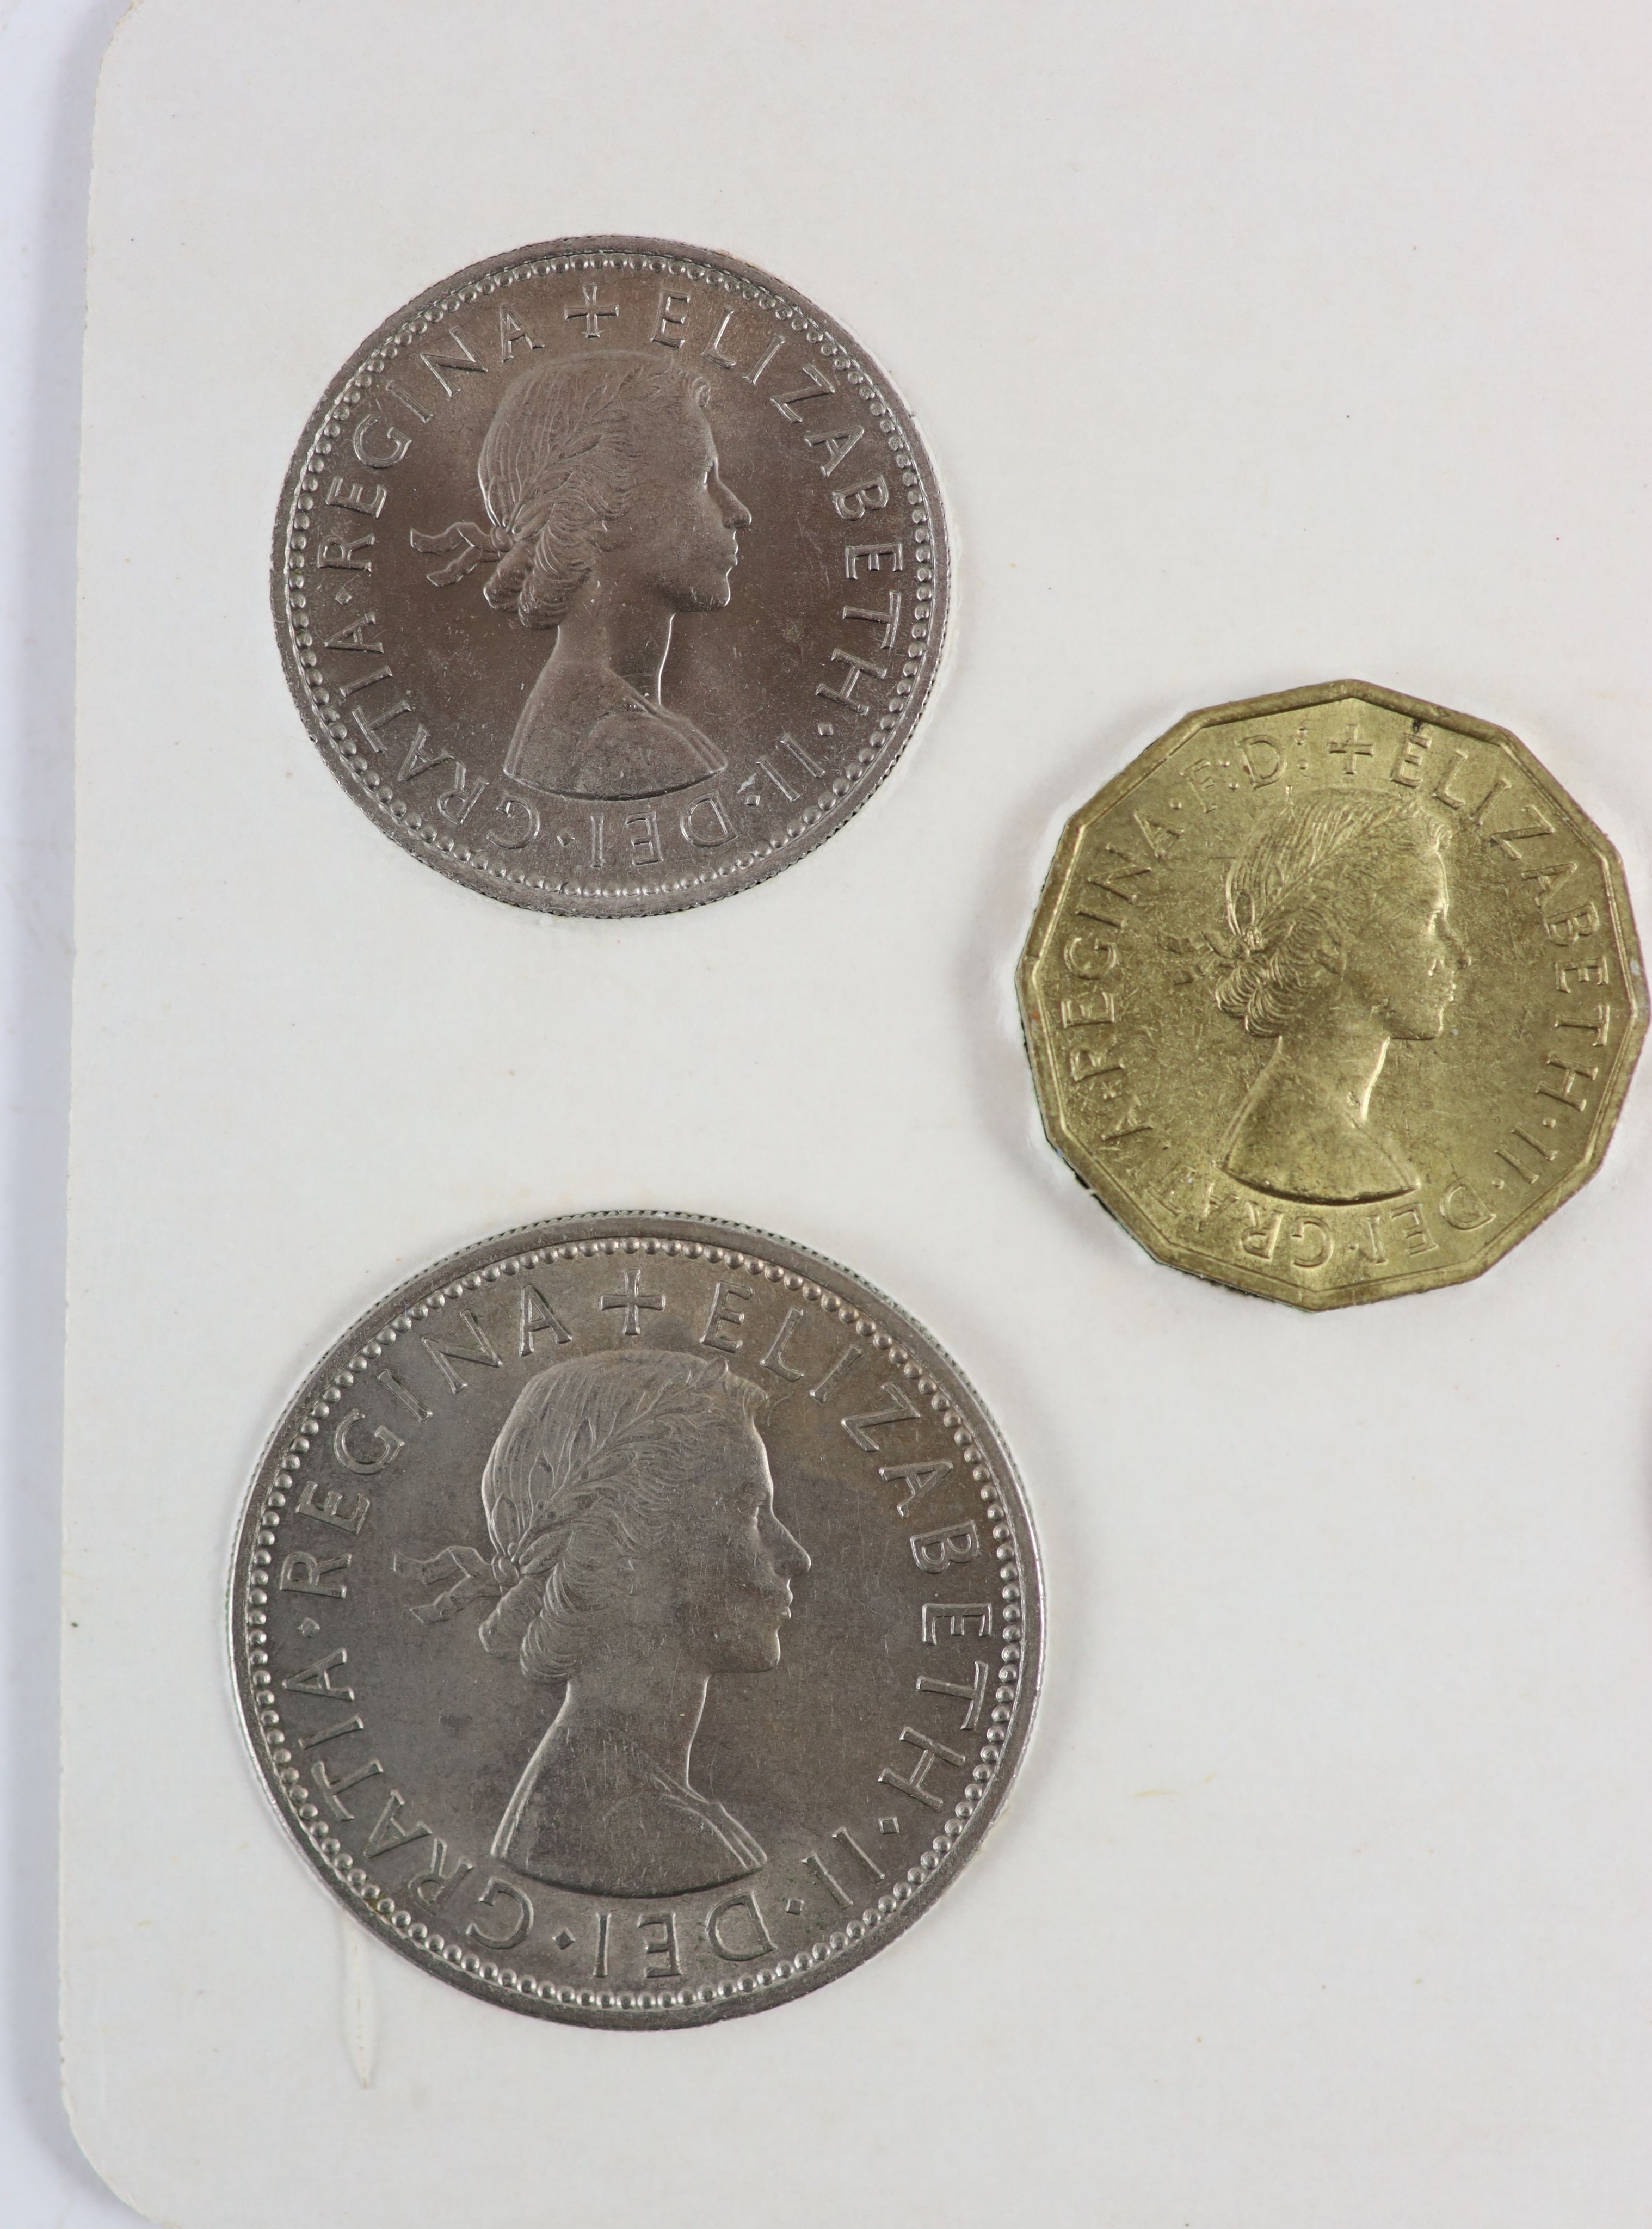 Queen Elizabeth II pre-decimal specimen coin sets for 1953 - 1967, first and second issues, all EF/ - Image 26 of 34